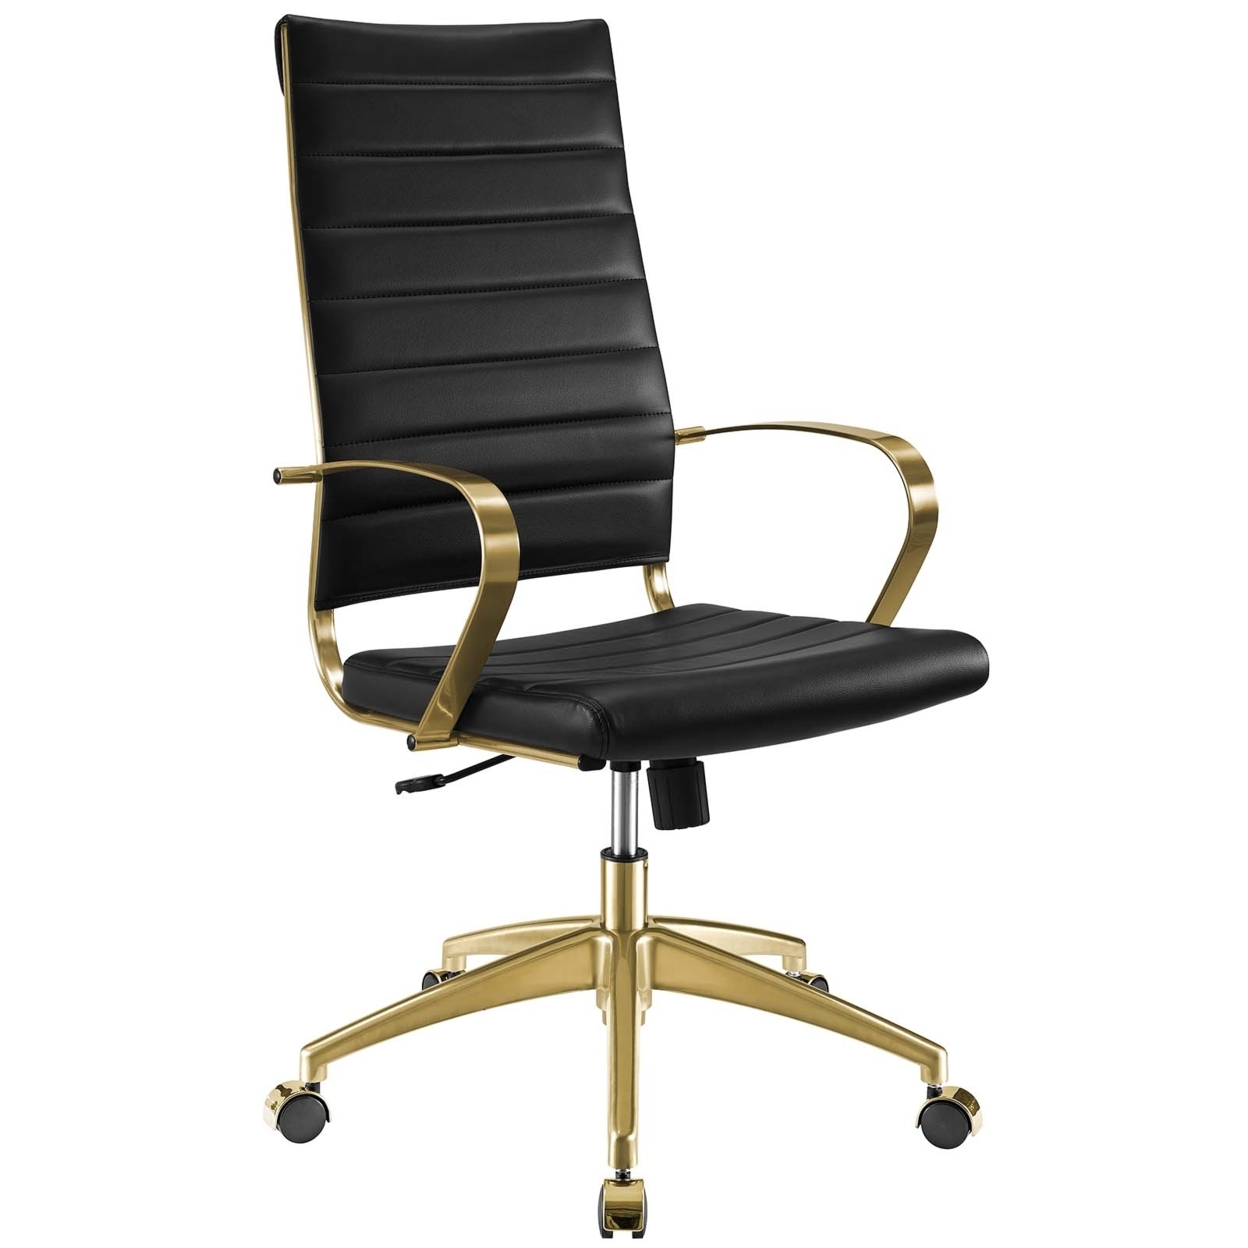 Jive Gold Stainless Steel Highback Office Chair,Gold Black